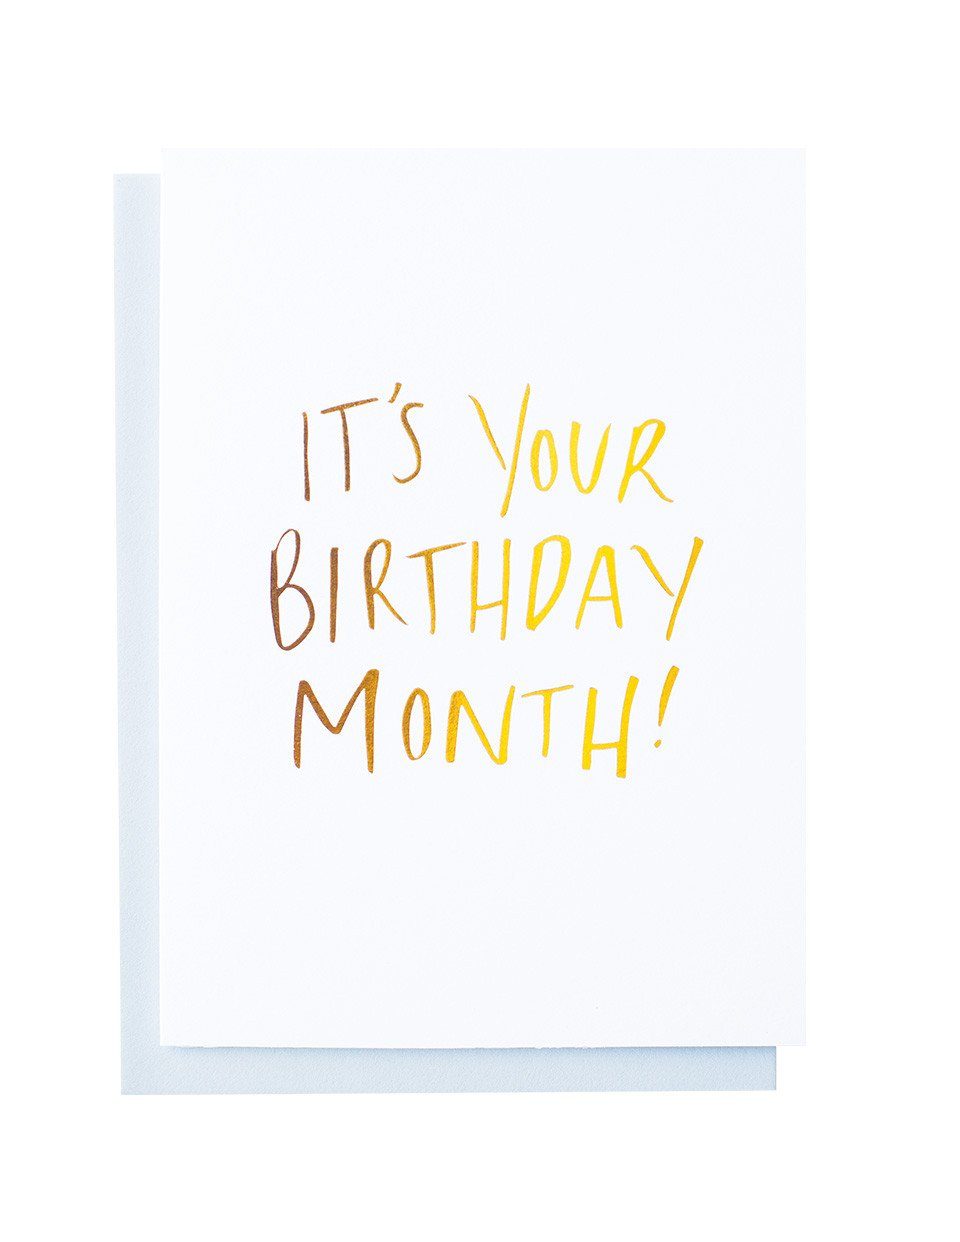 It’s Your Birthday Month foiled greeting card | Blushing Confetti